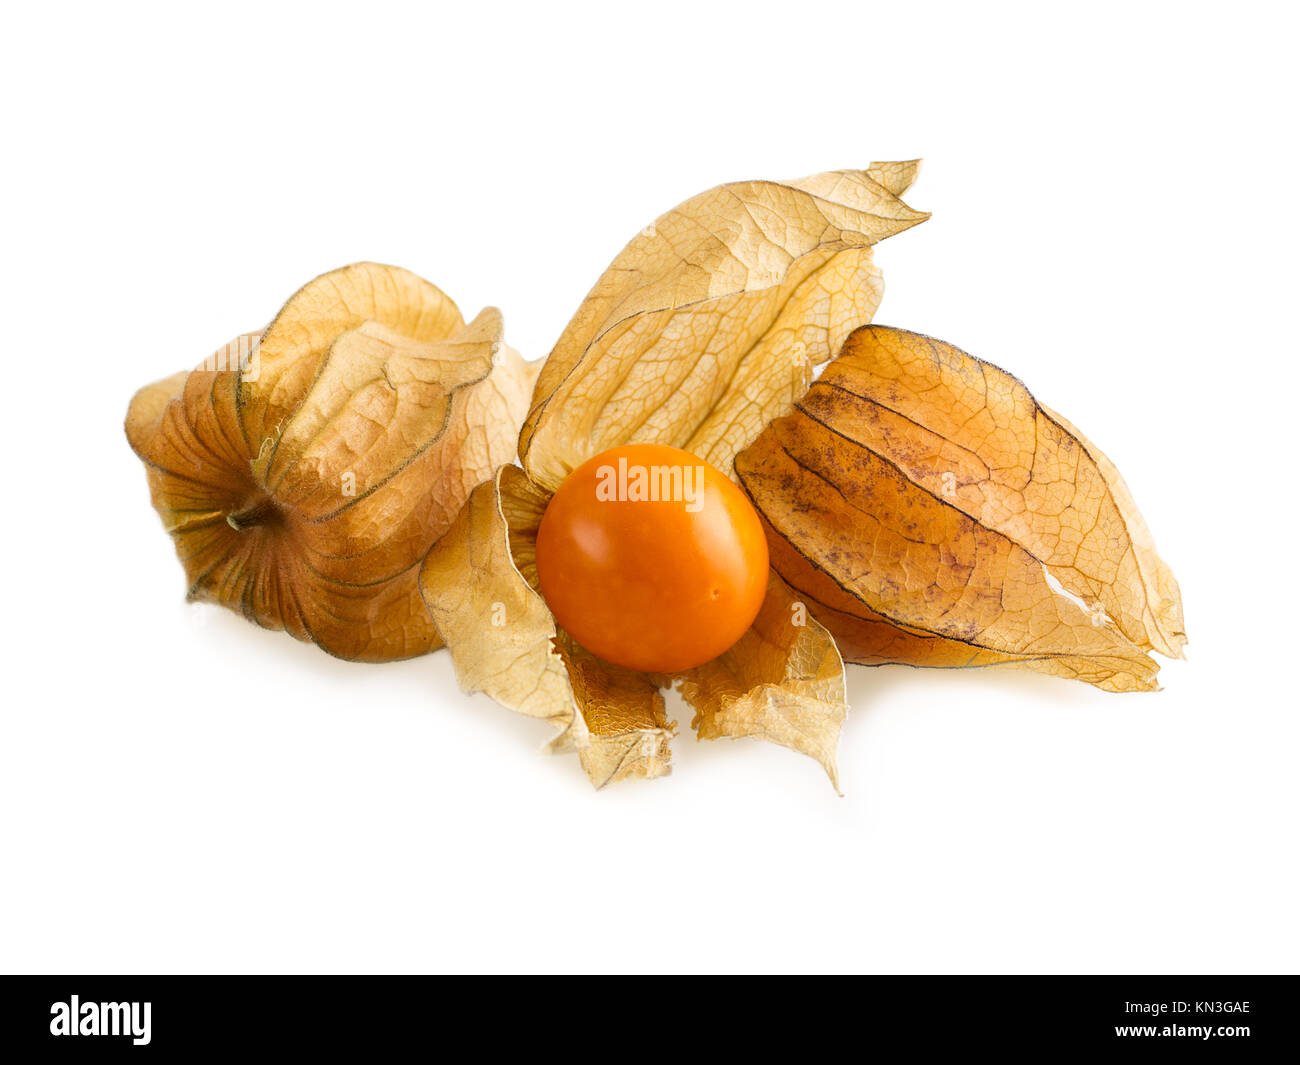 Physalis or cape gooseberry fruit isolated on white. Ripe physalis fruits with calyx open Stock Photo